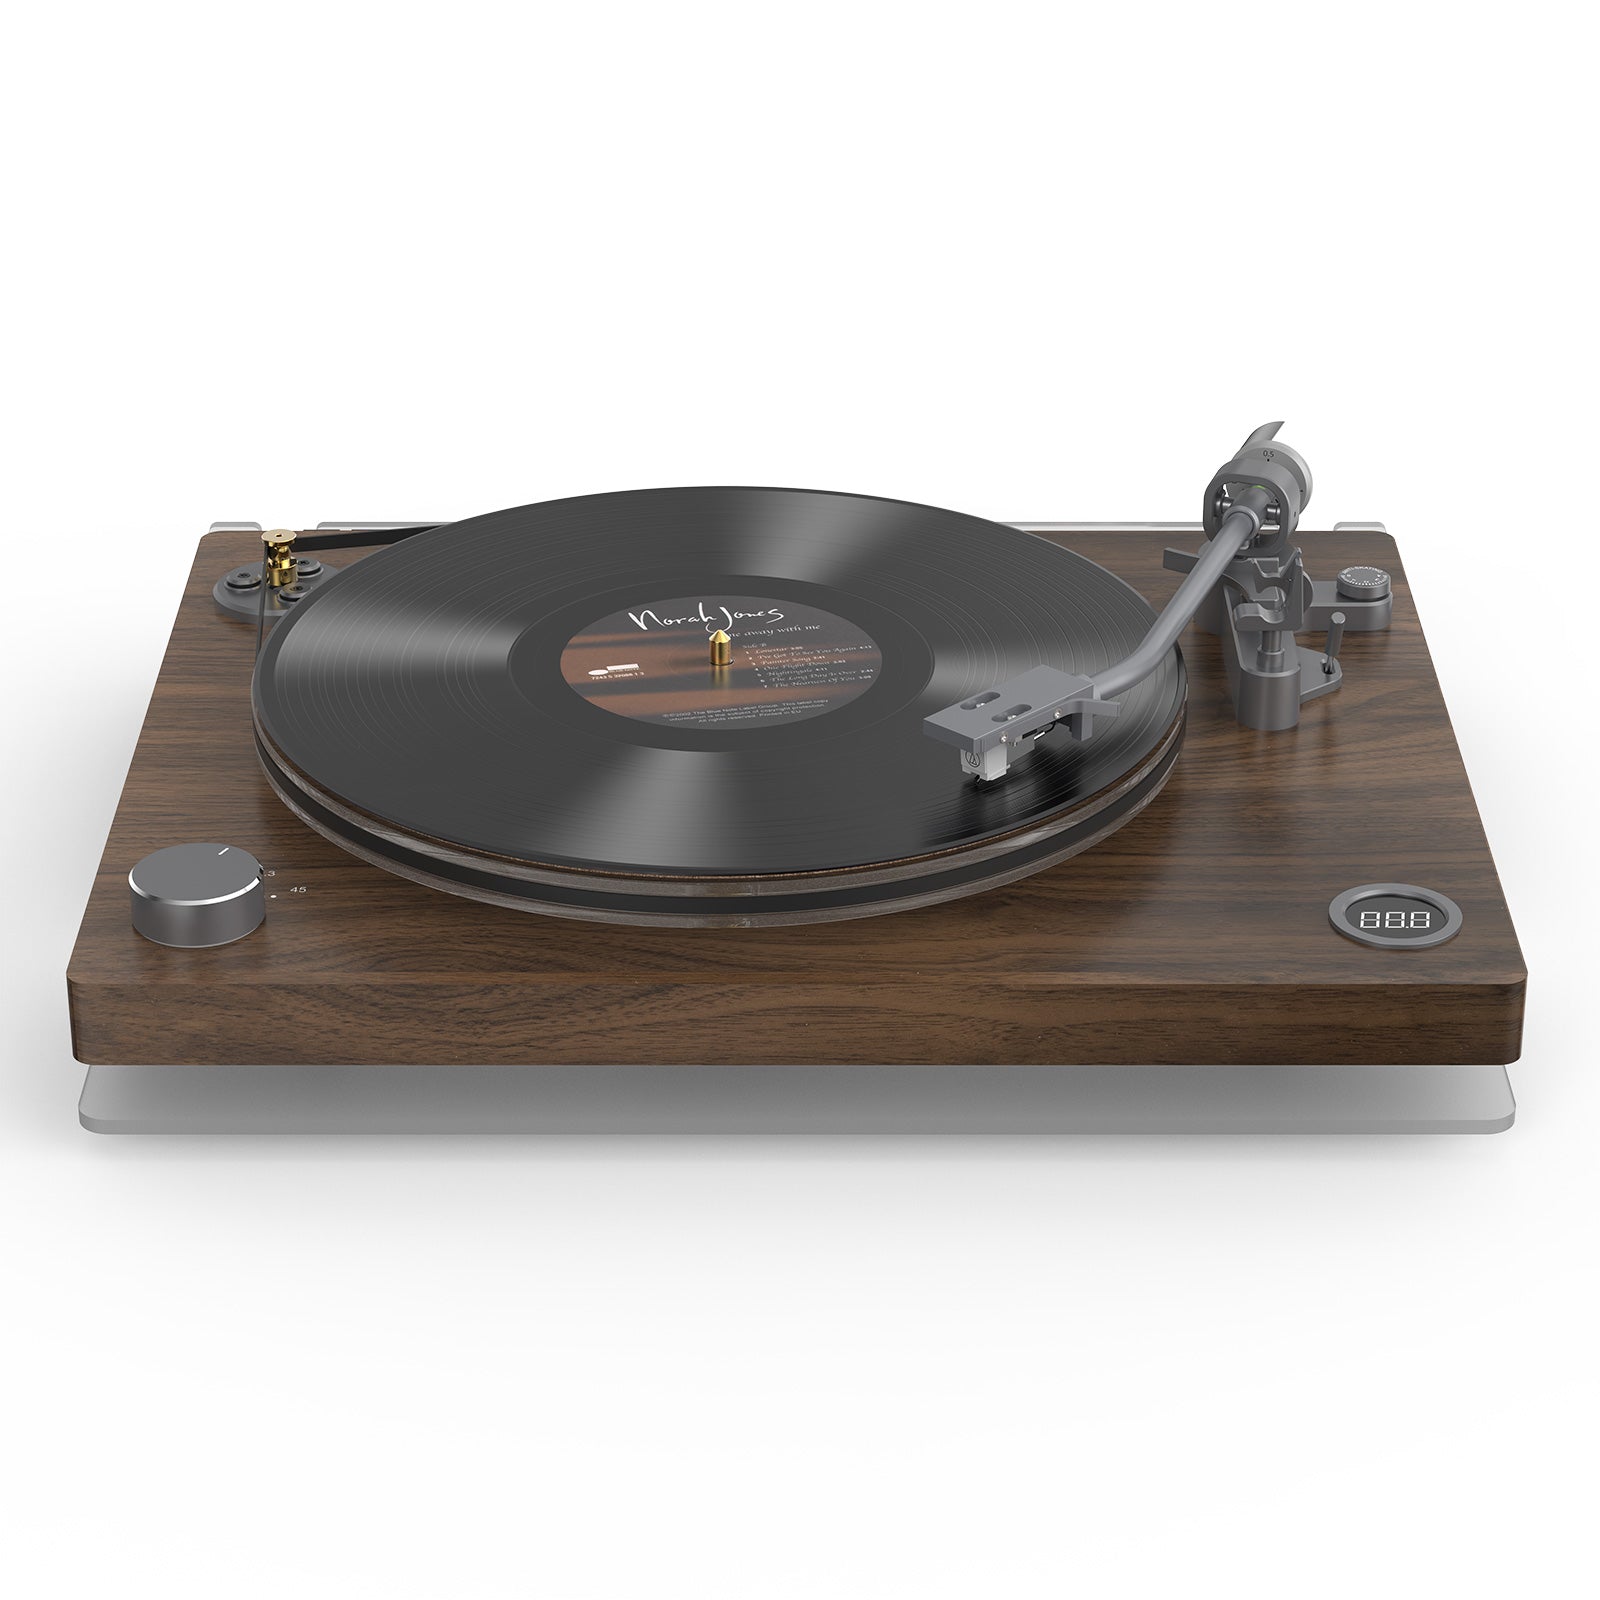 Audio Keeper | 2 Speed Belt Drive Turntable HQKZ-011 with MM Cartridge